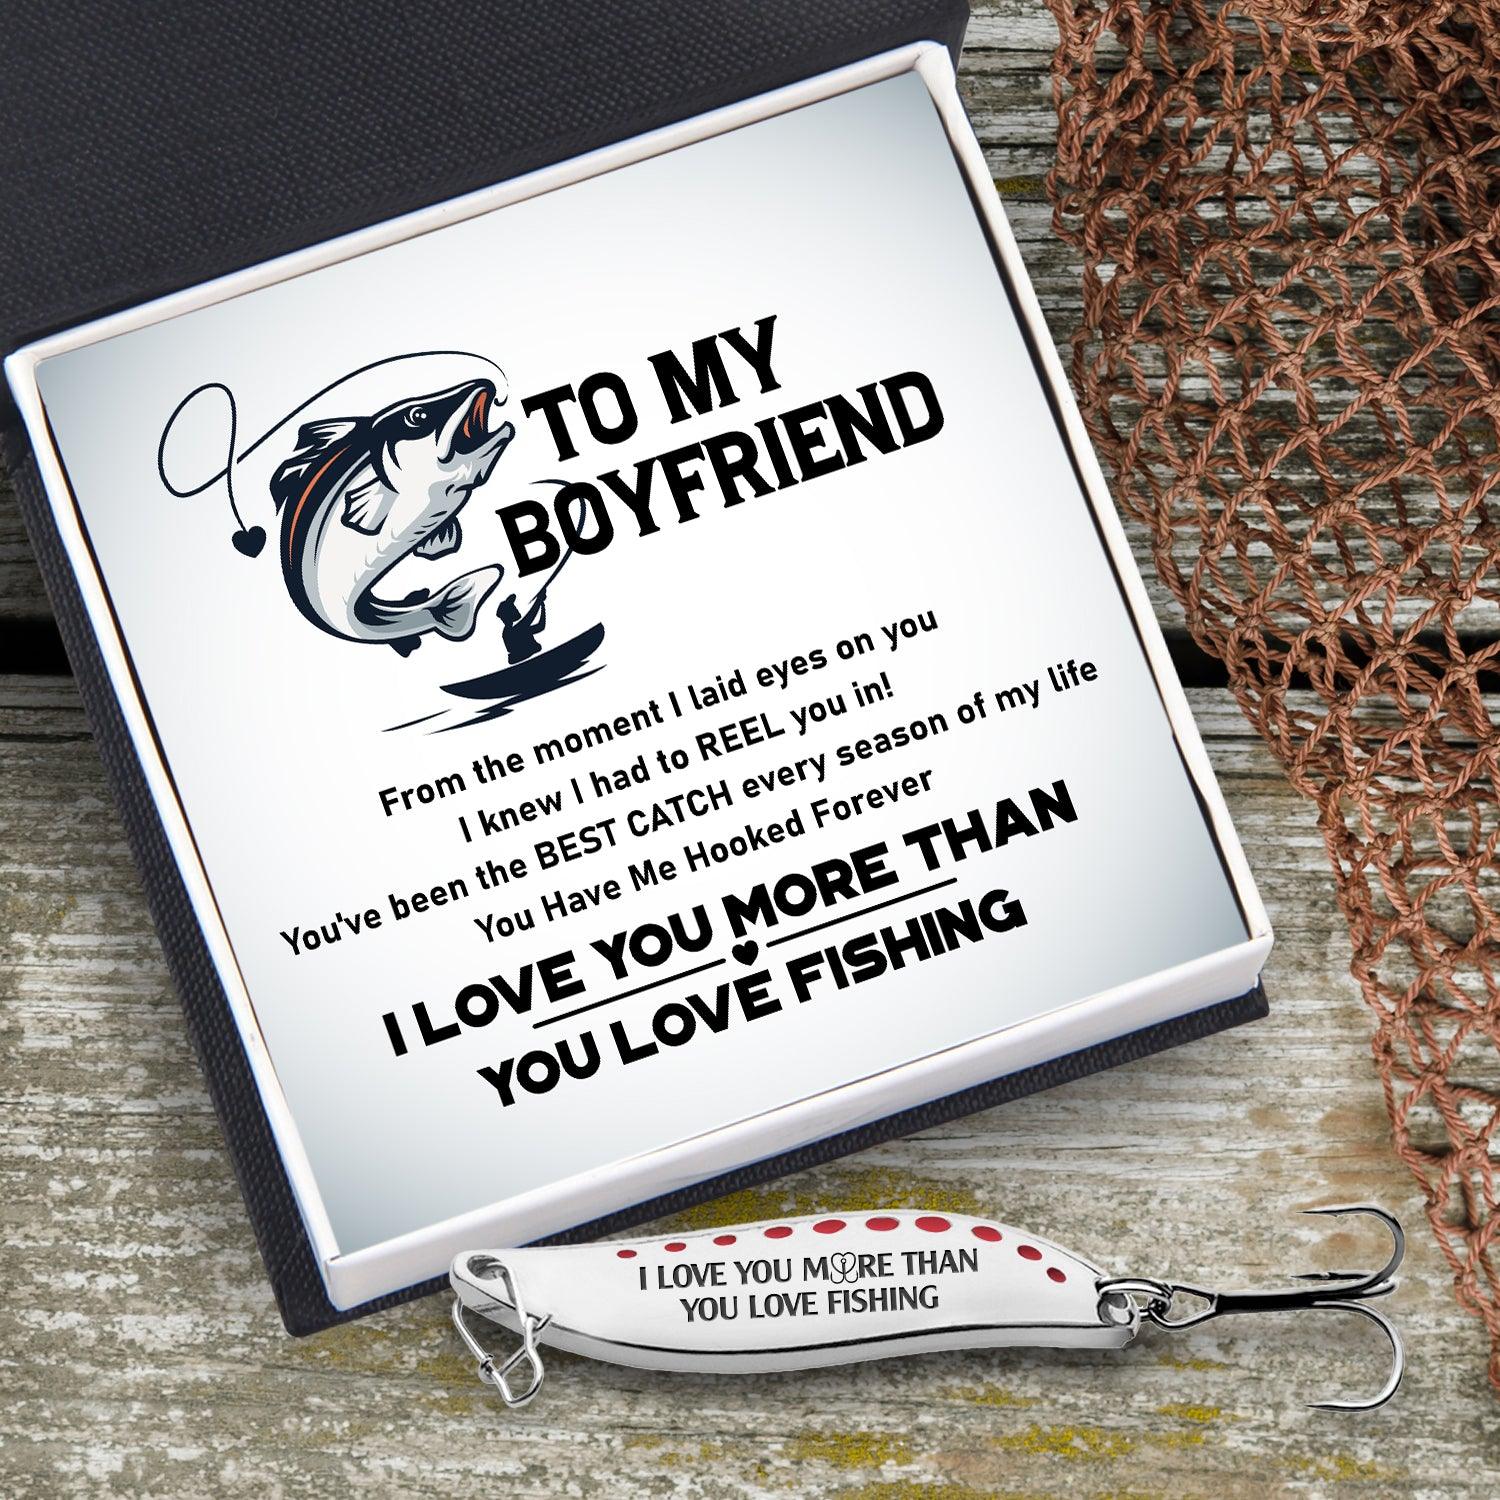 Fishing Spoon Lure - Fishing - To My Boyfriend - You Have Me Hooked Forever - Augfaa12003 - Gifts Holder